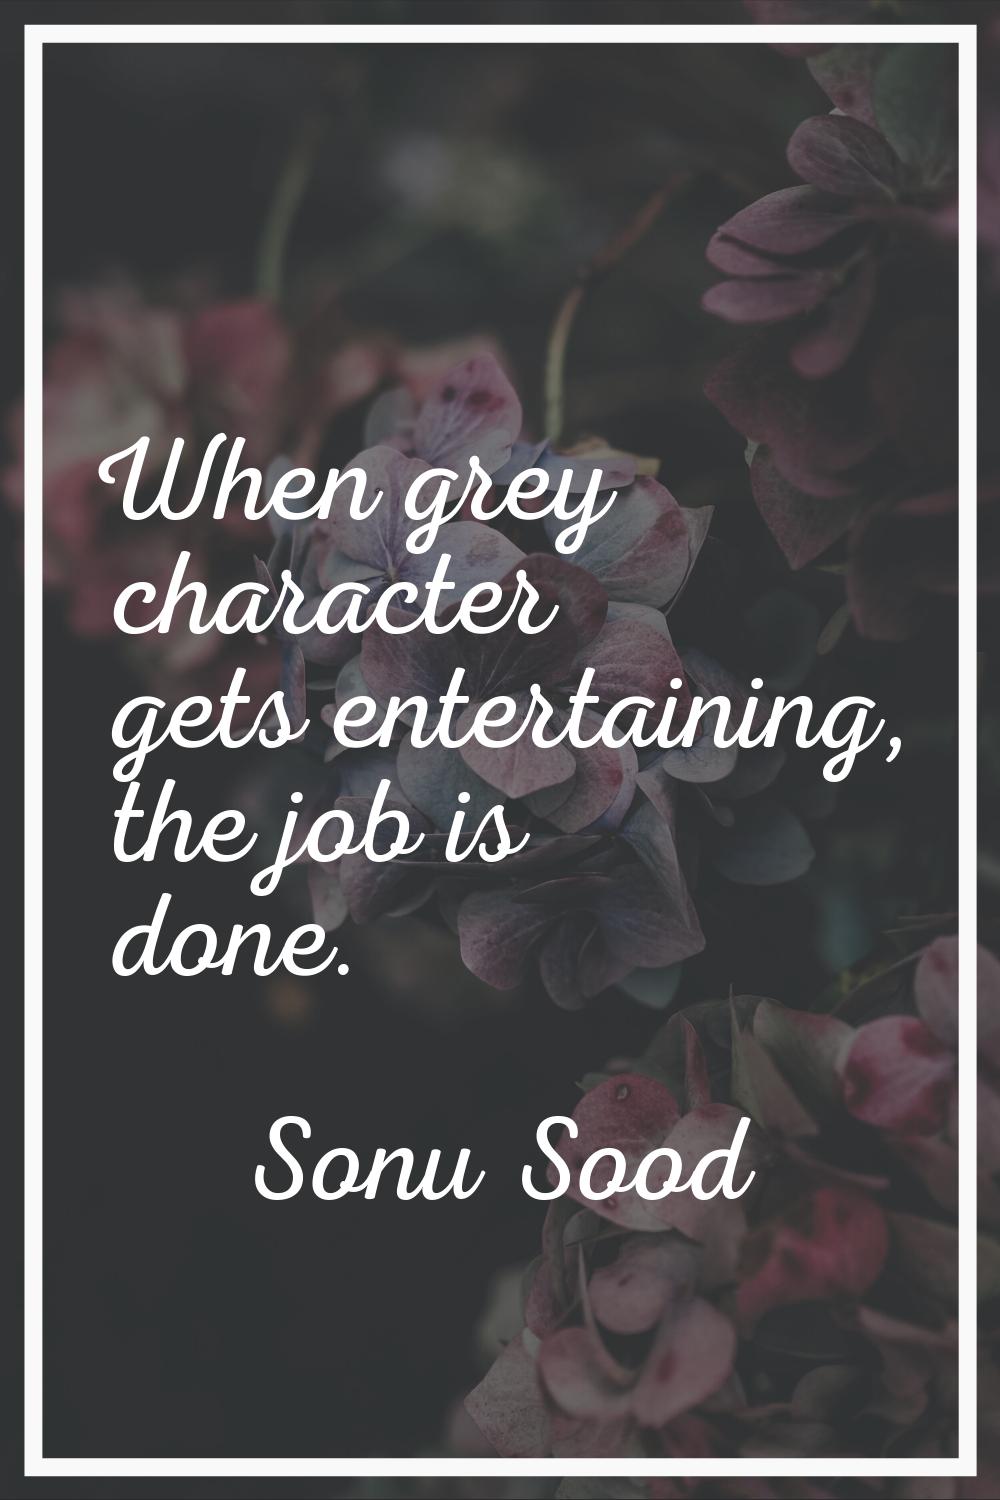 When grey character gets entertaining, the job is done.